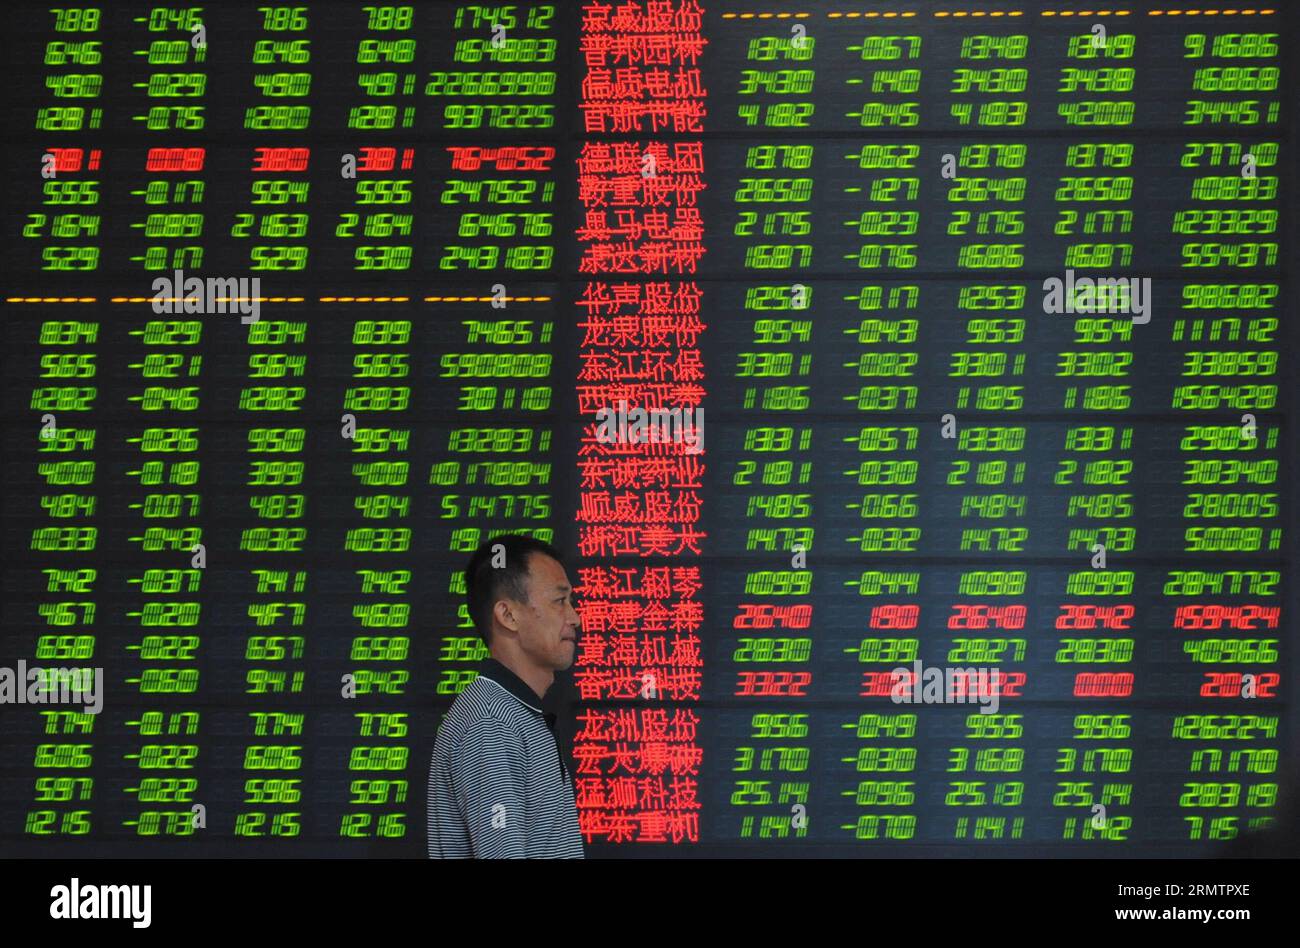 An investor is seen in front of a screen showing stock information at a trading hall of a securities firm in Fuyang City, east China s Anhui Province, Sept. 16, 2014. Chinese shares closed lower on Tuesday, with the benchmark Shanghai Composite Index down 1.82 percent to finish at 2,296.55 points, owing to the plunge of growth enterprises. The smaller Shenzhen Component Index lost 191.57 points, or 2.36 percent, to close at 7,921.07 points. ) (ry) CHINA-STOCK-DROP (CN) LuxQijian PUBLICATIONxNOTxINxCHN   to Investor IS Lakes in Front of a Screen showing Stick Information AT a Trading Hall of a Stock Photo